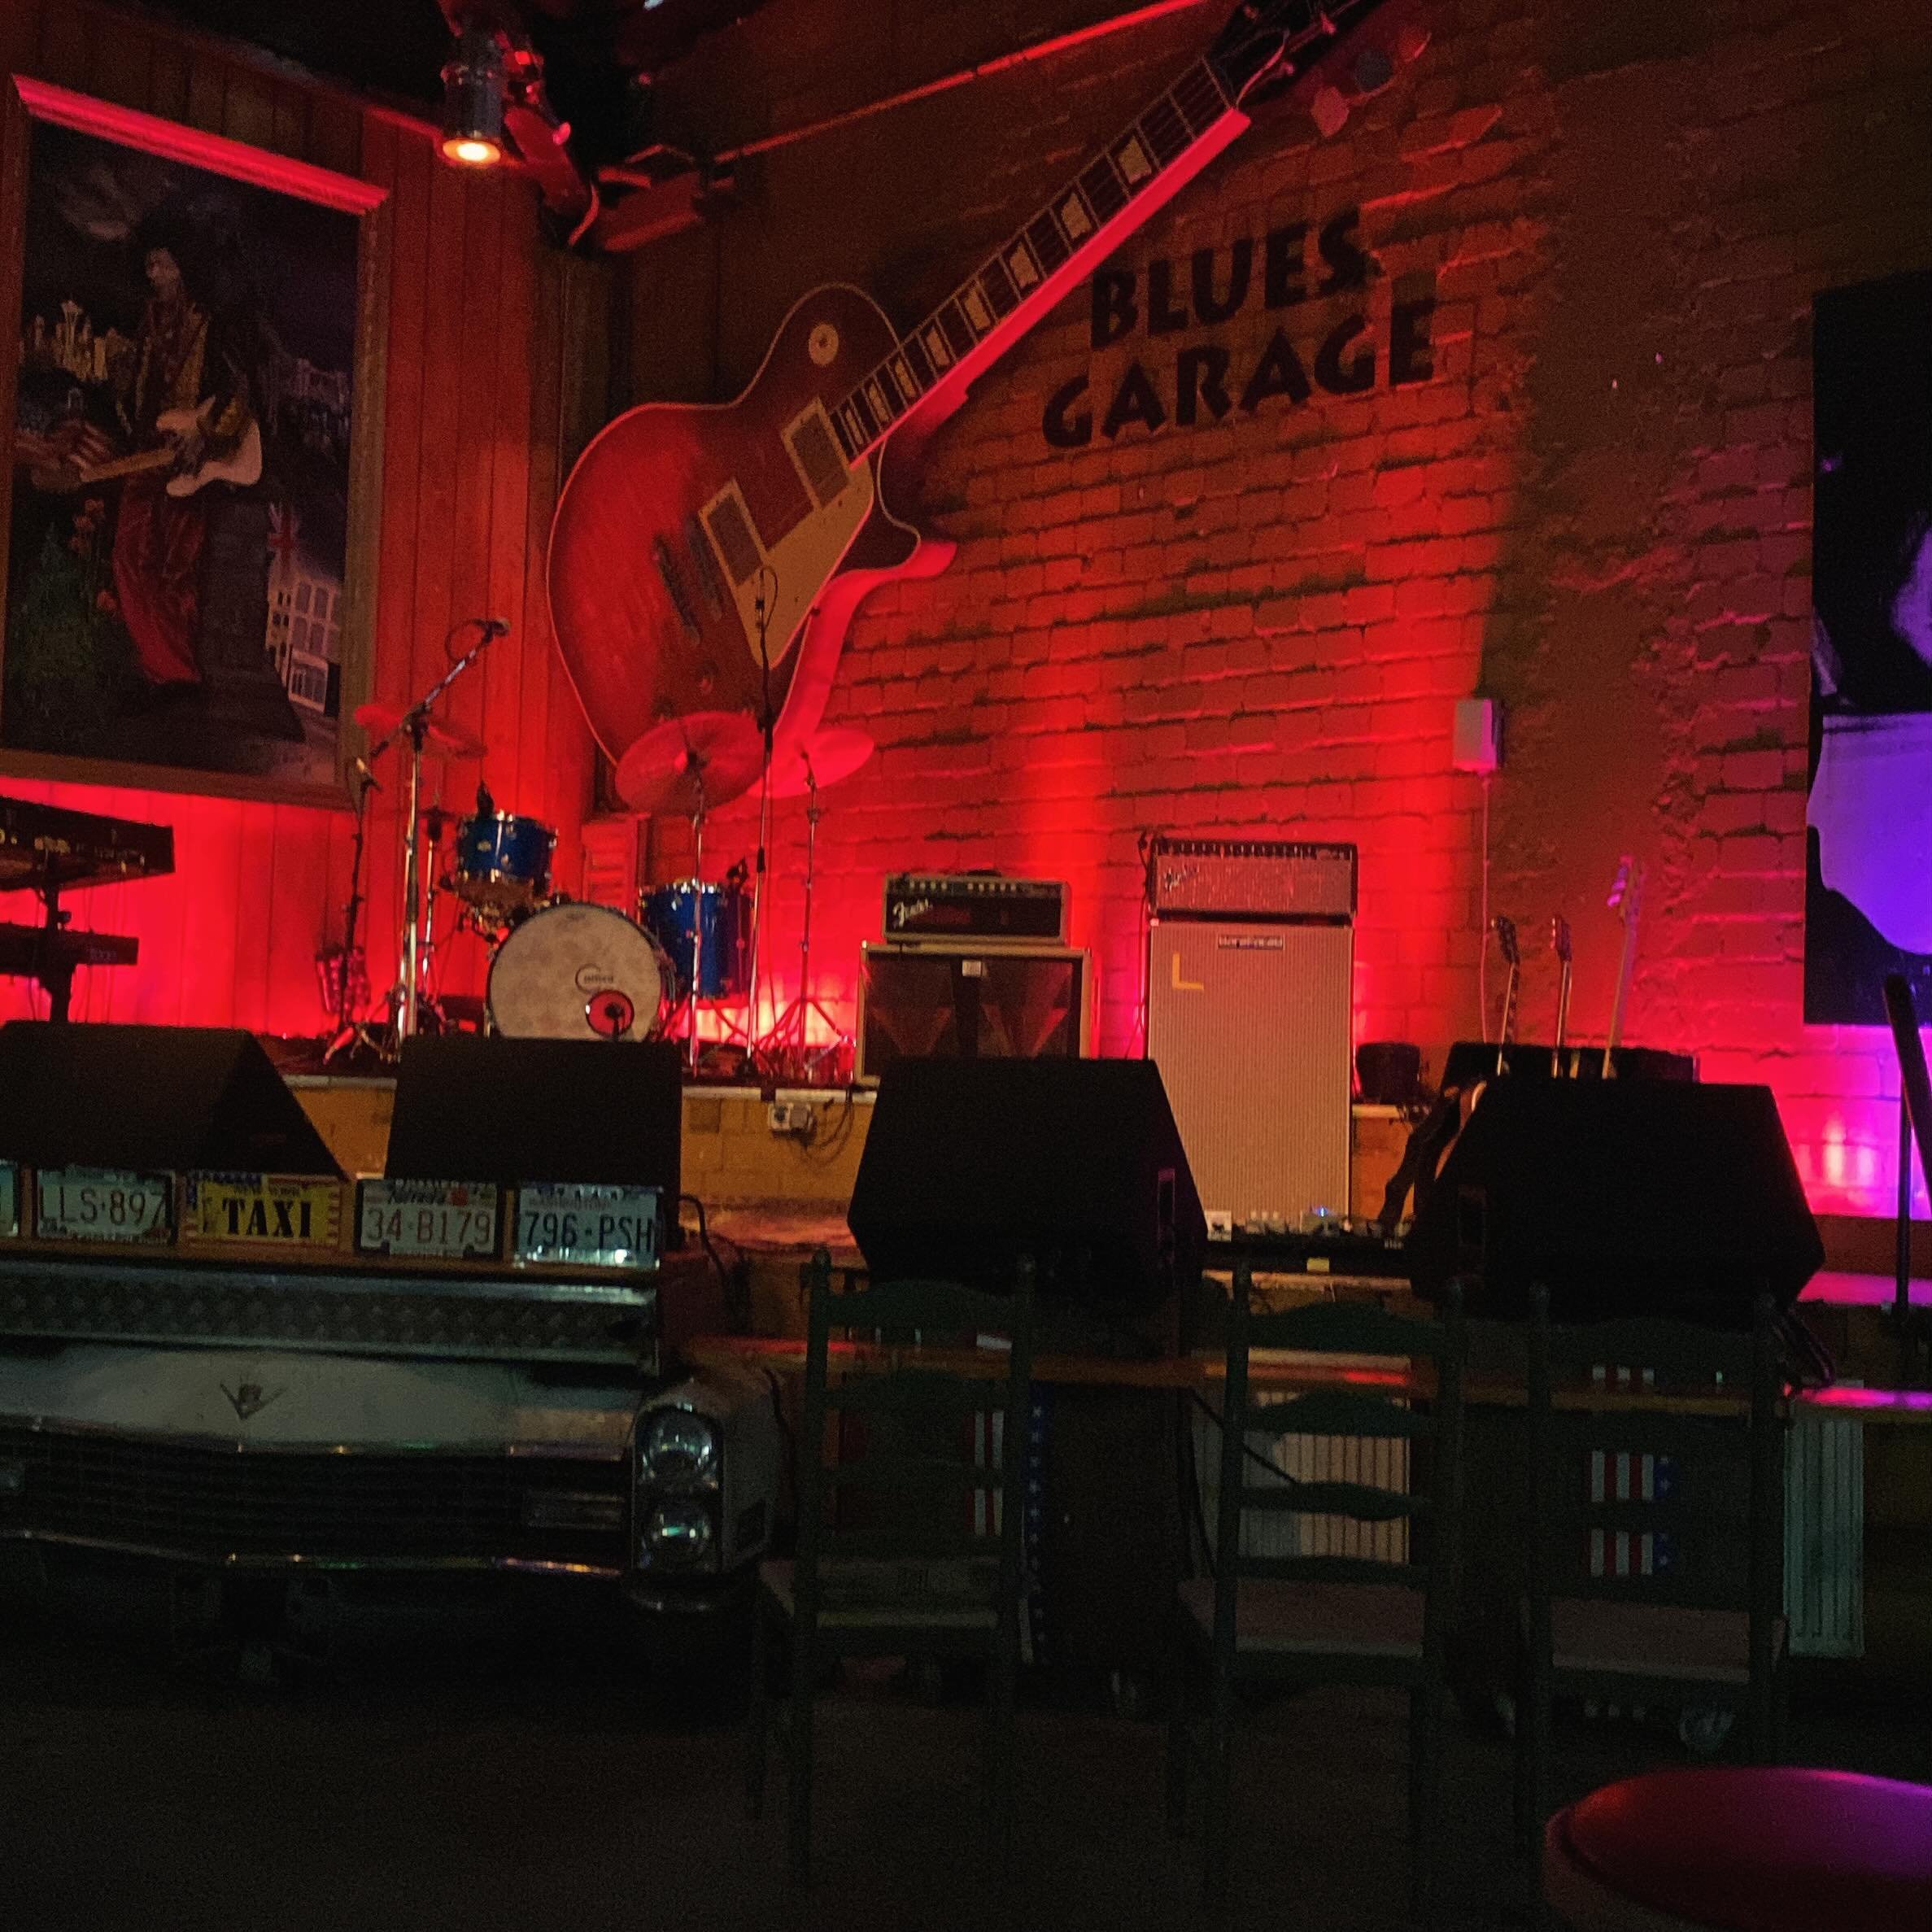 Back at 1 of my favourite places tonight.  #bluesgarageisernhagen  Some tickets left if your in the mood for some live music!!!!